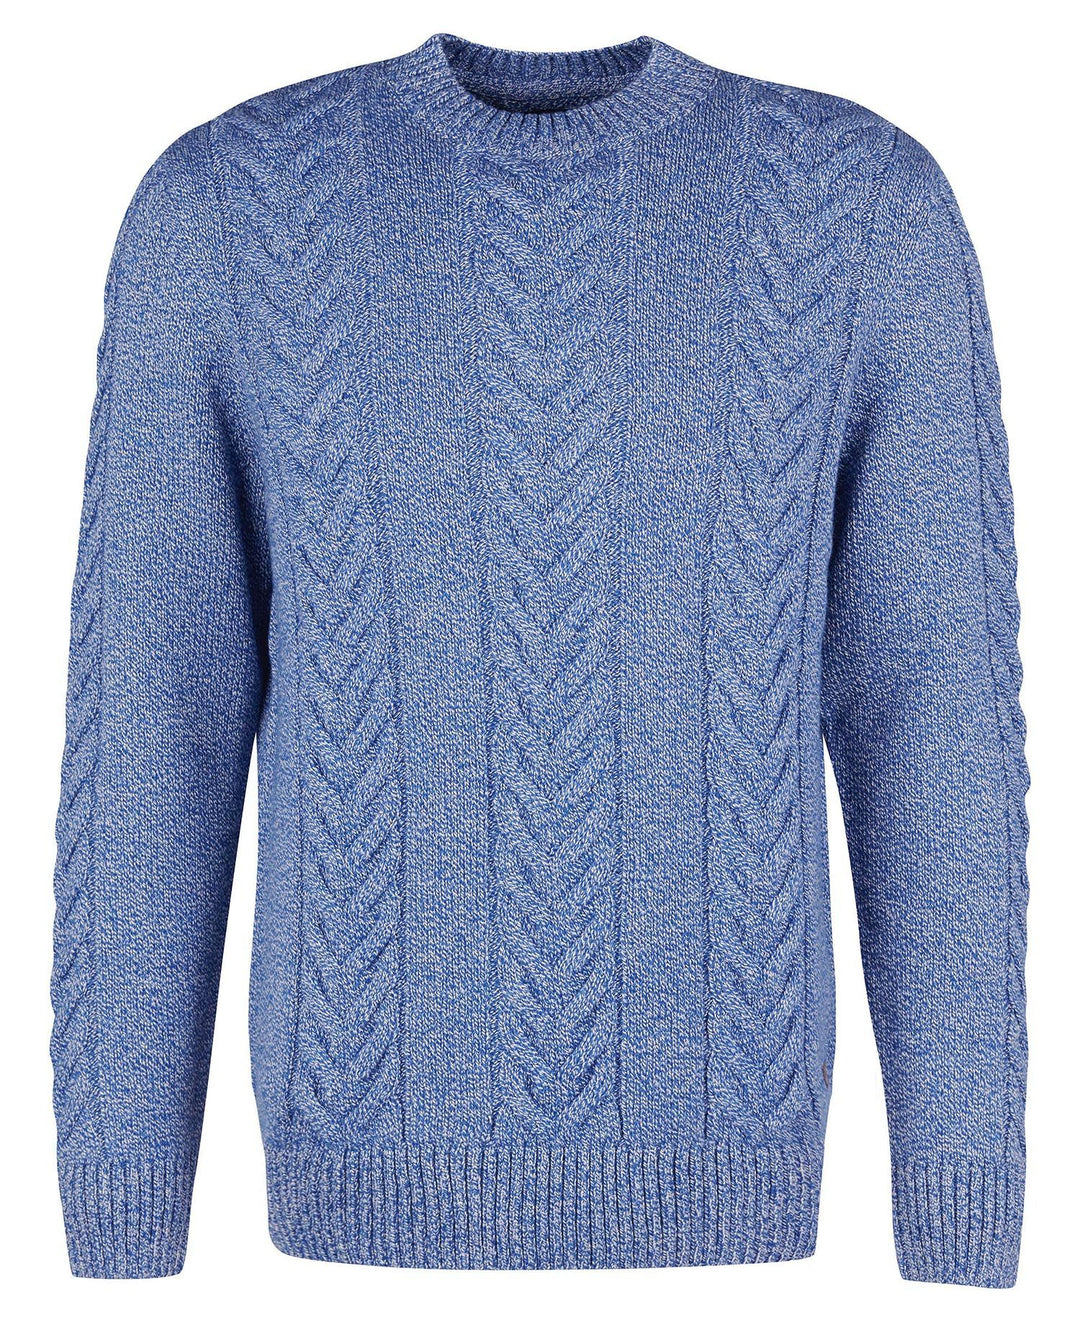 Barbour Essential Cable Knit Sweatshirt/Pulover MKN-1325